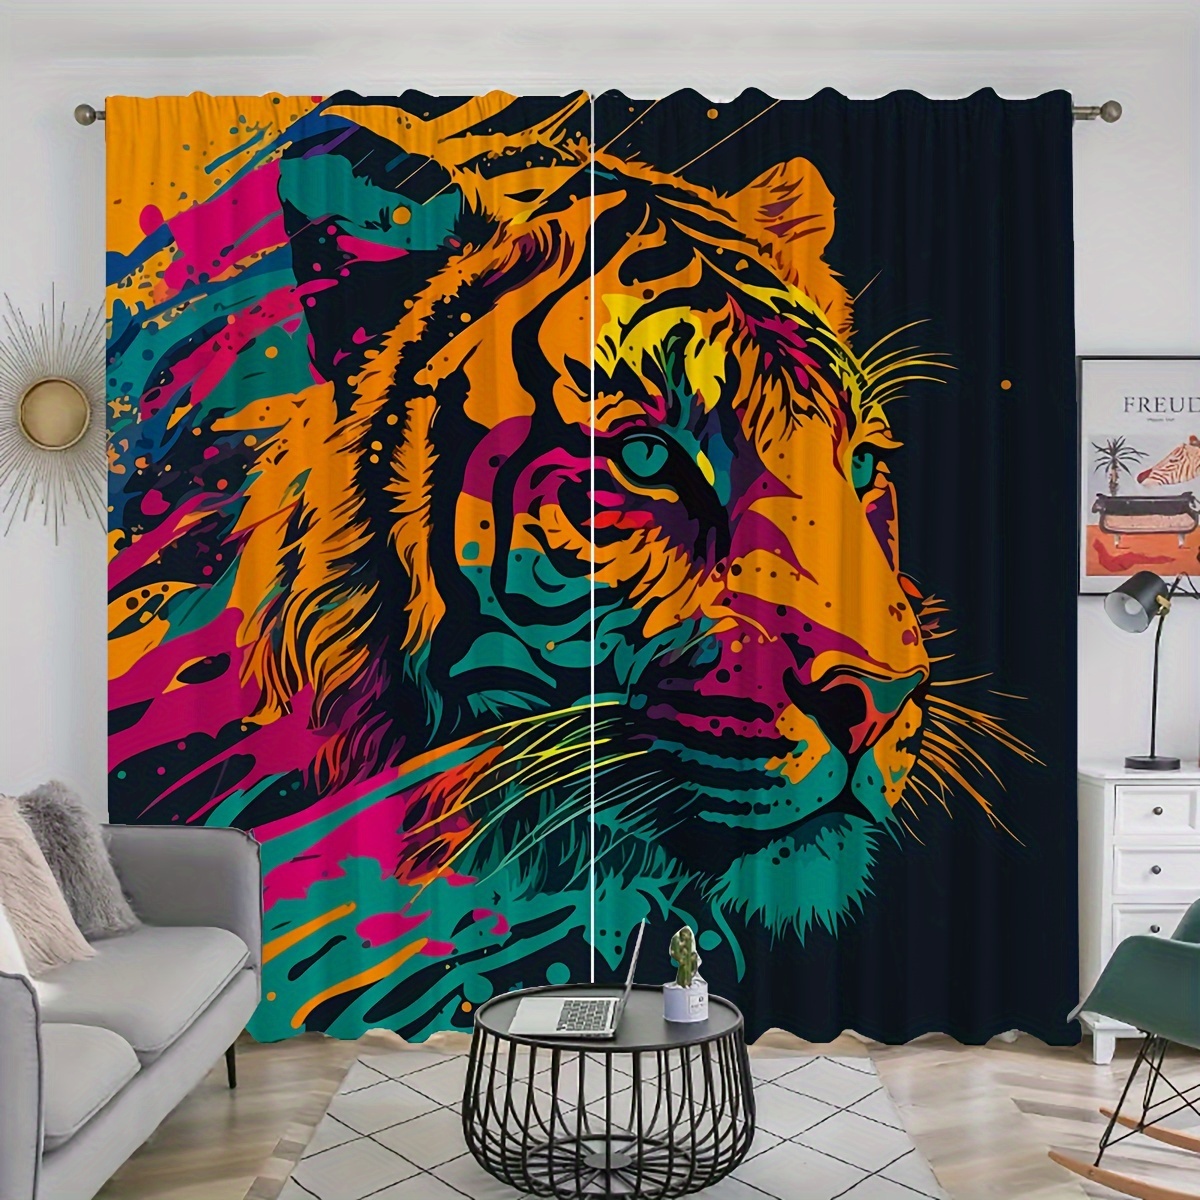 

2pcs, Painted Tiger Printed Curtains, Rod Pocket Curtain, Suitable For Restaurants, Public Places, Living Rooms, Bedrooms, Offices, Study Rooms, Home Decoration